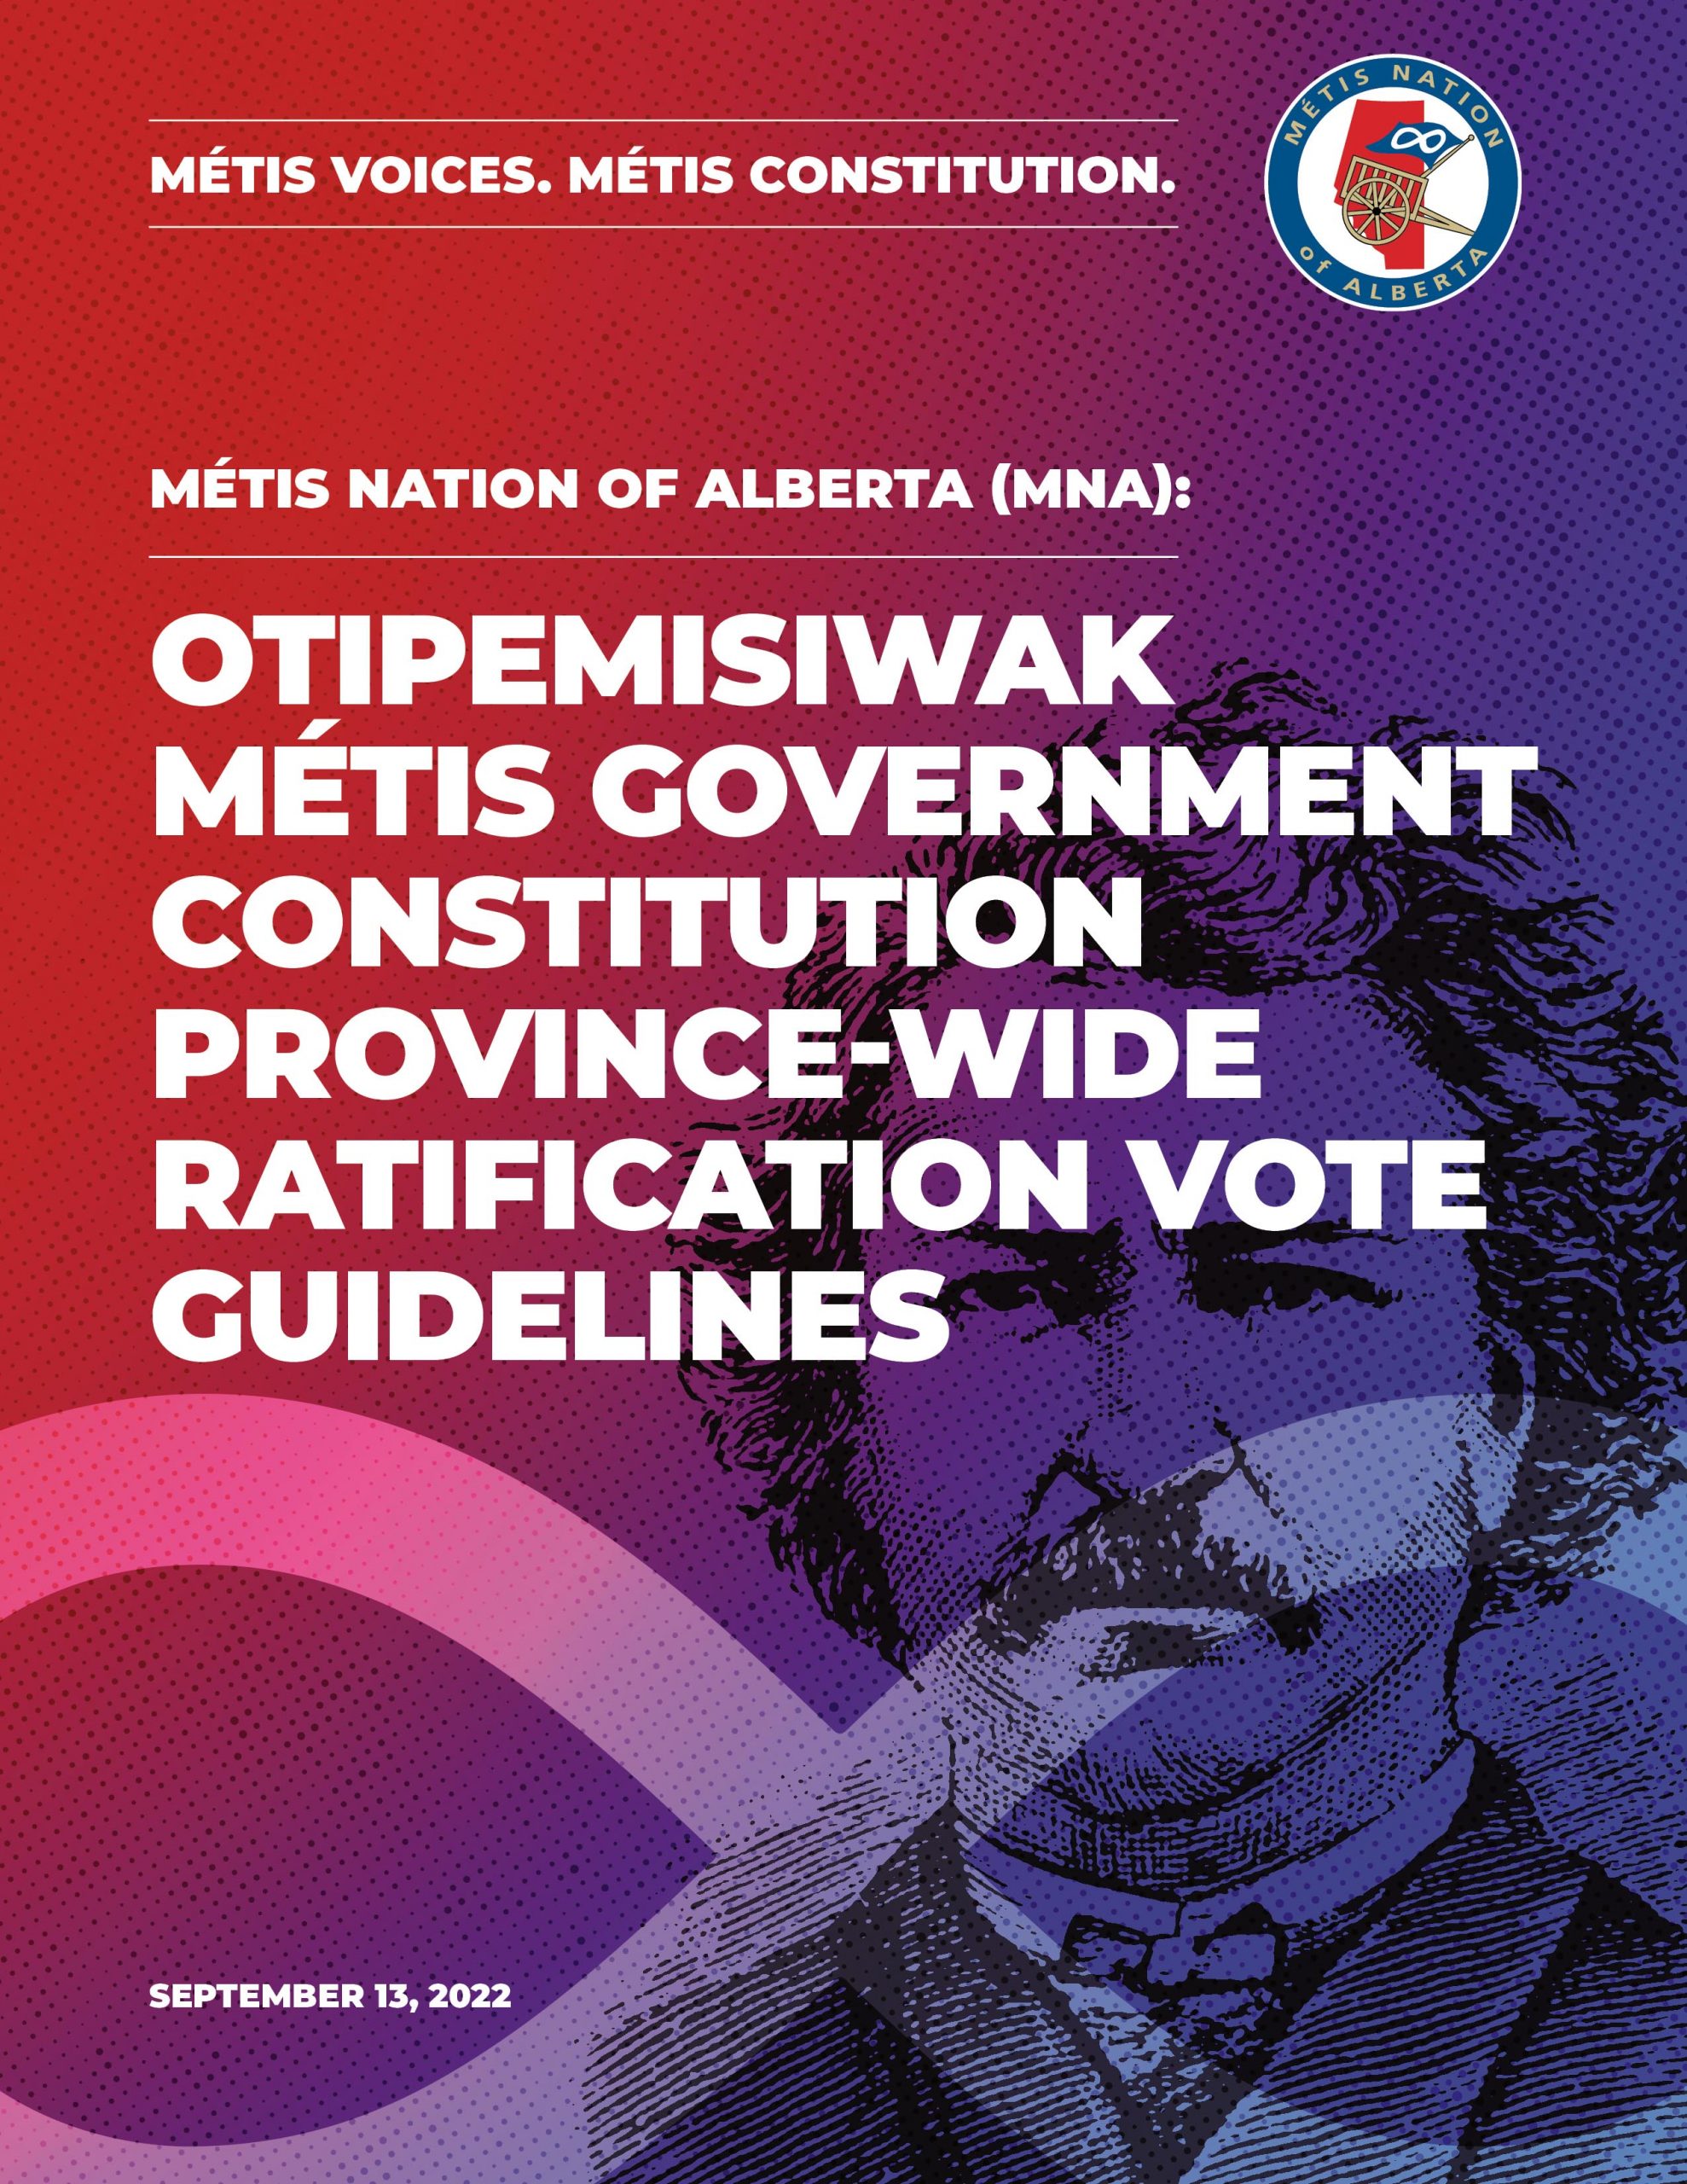 History in the Making the Métis Nation of Alberta announces